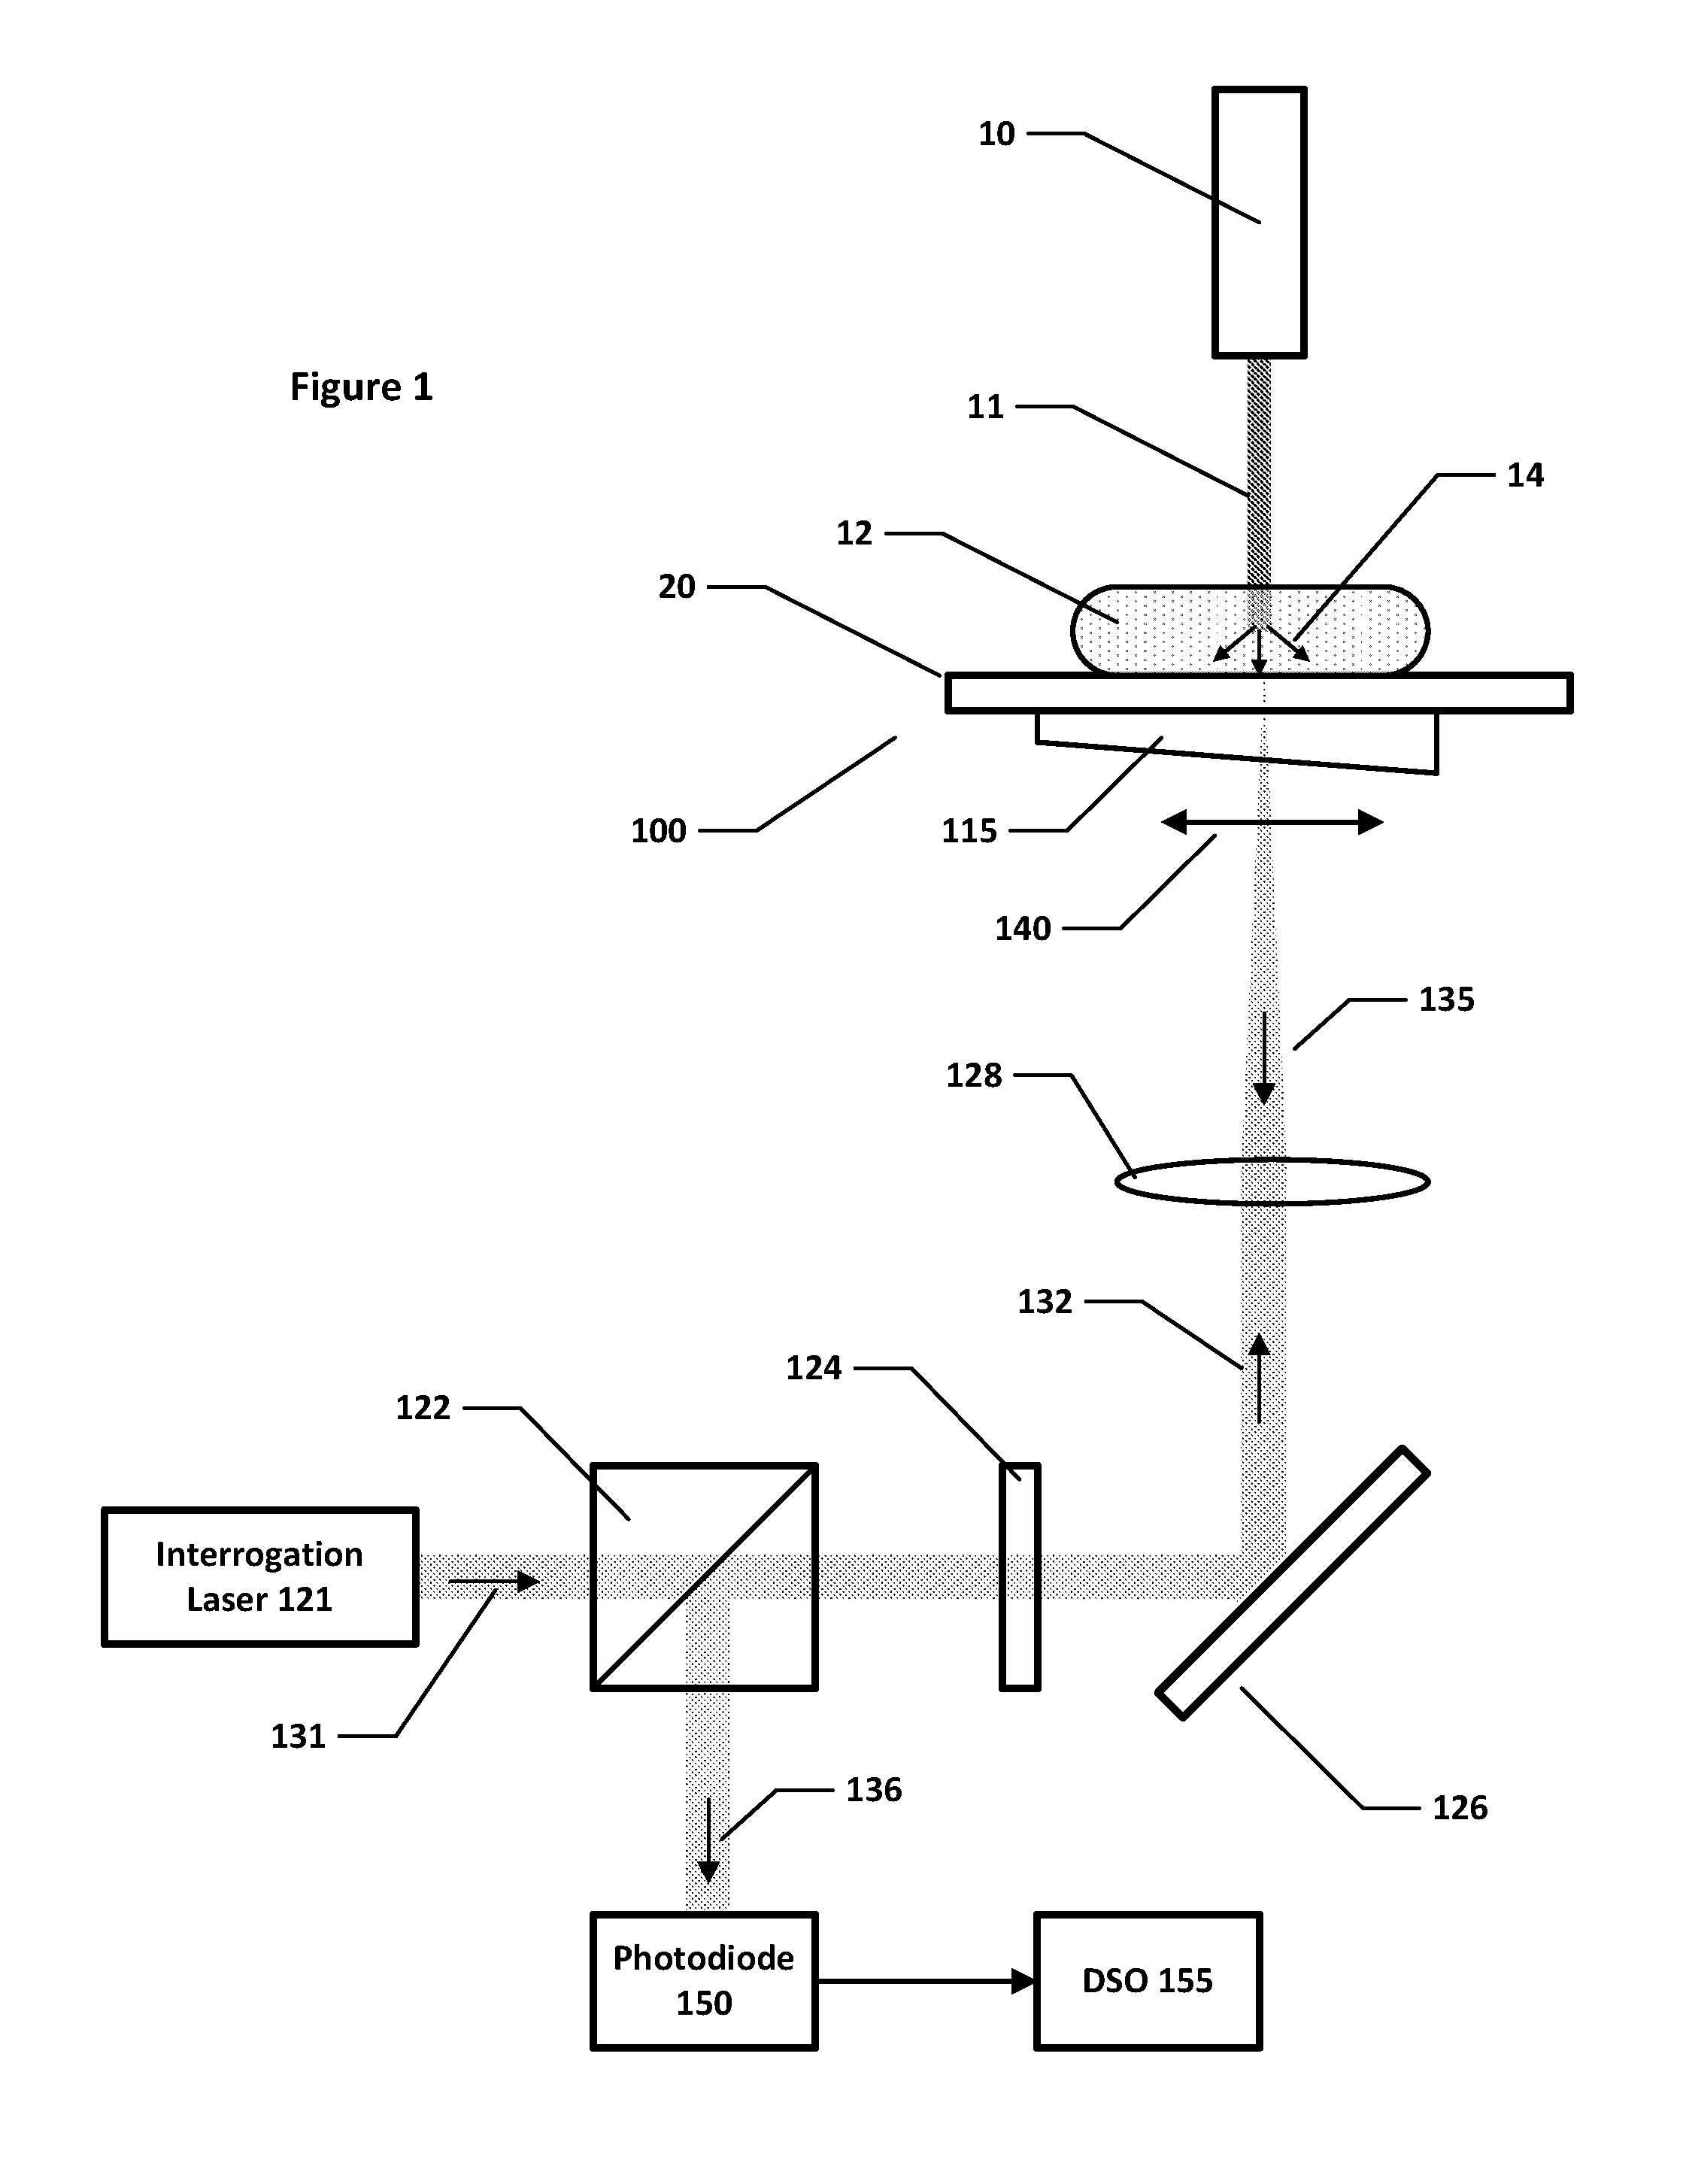 Apparatus and method for performing photoacoustic tomography